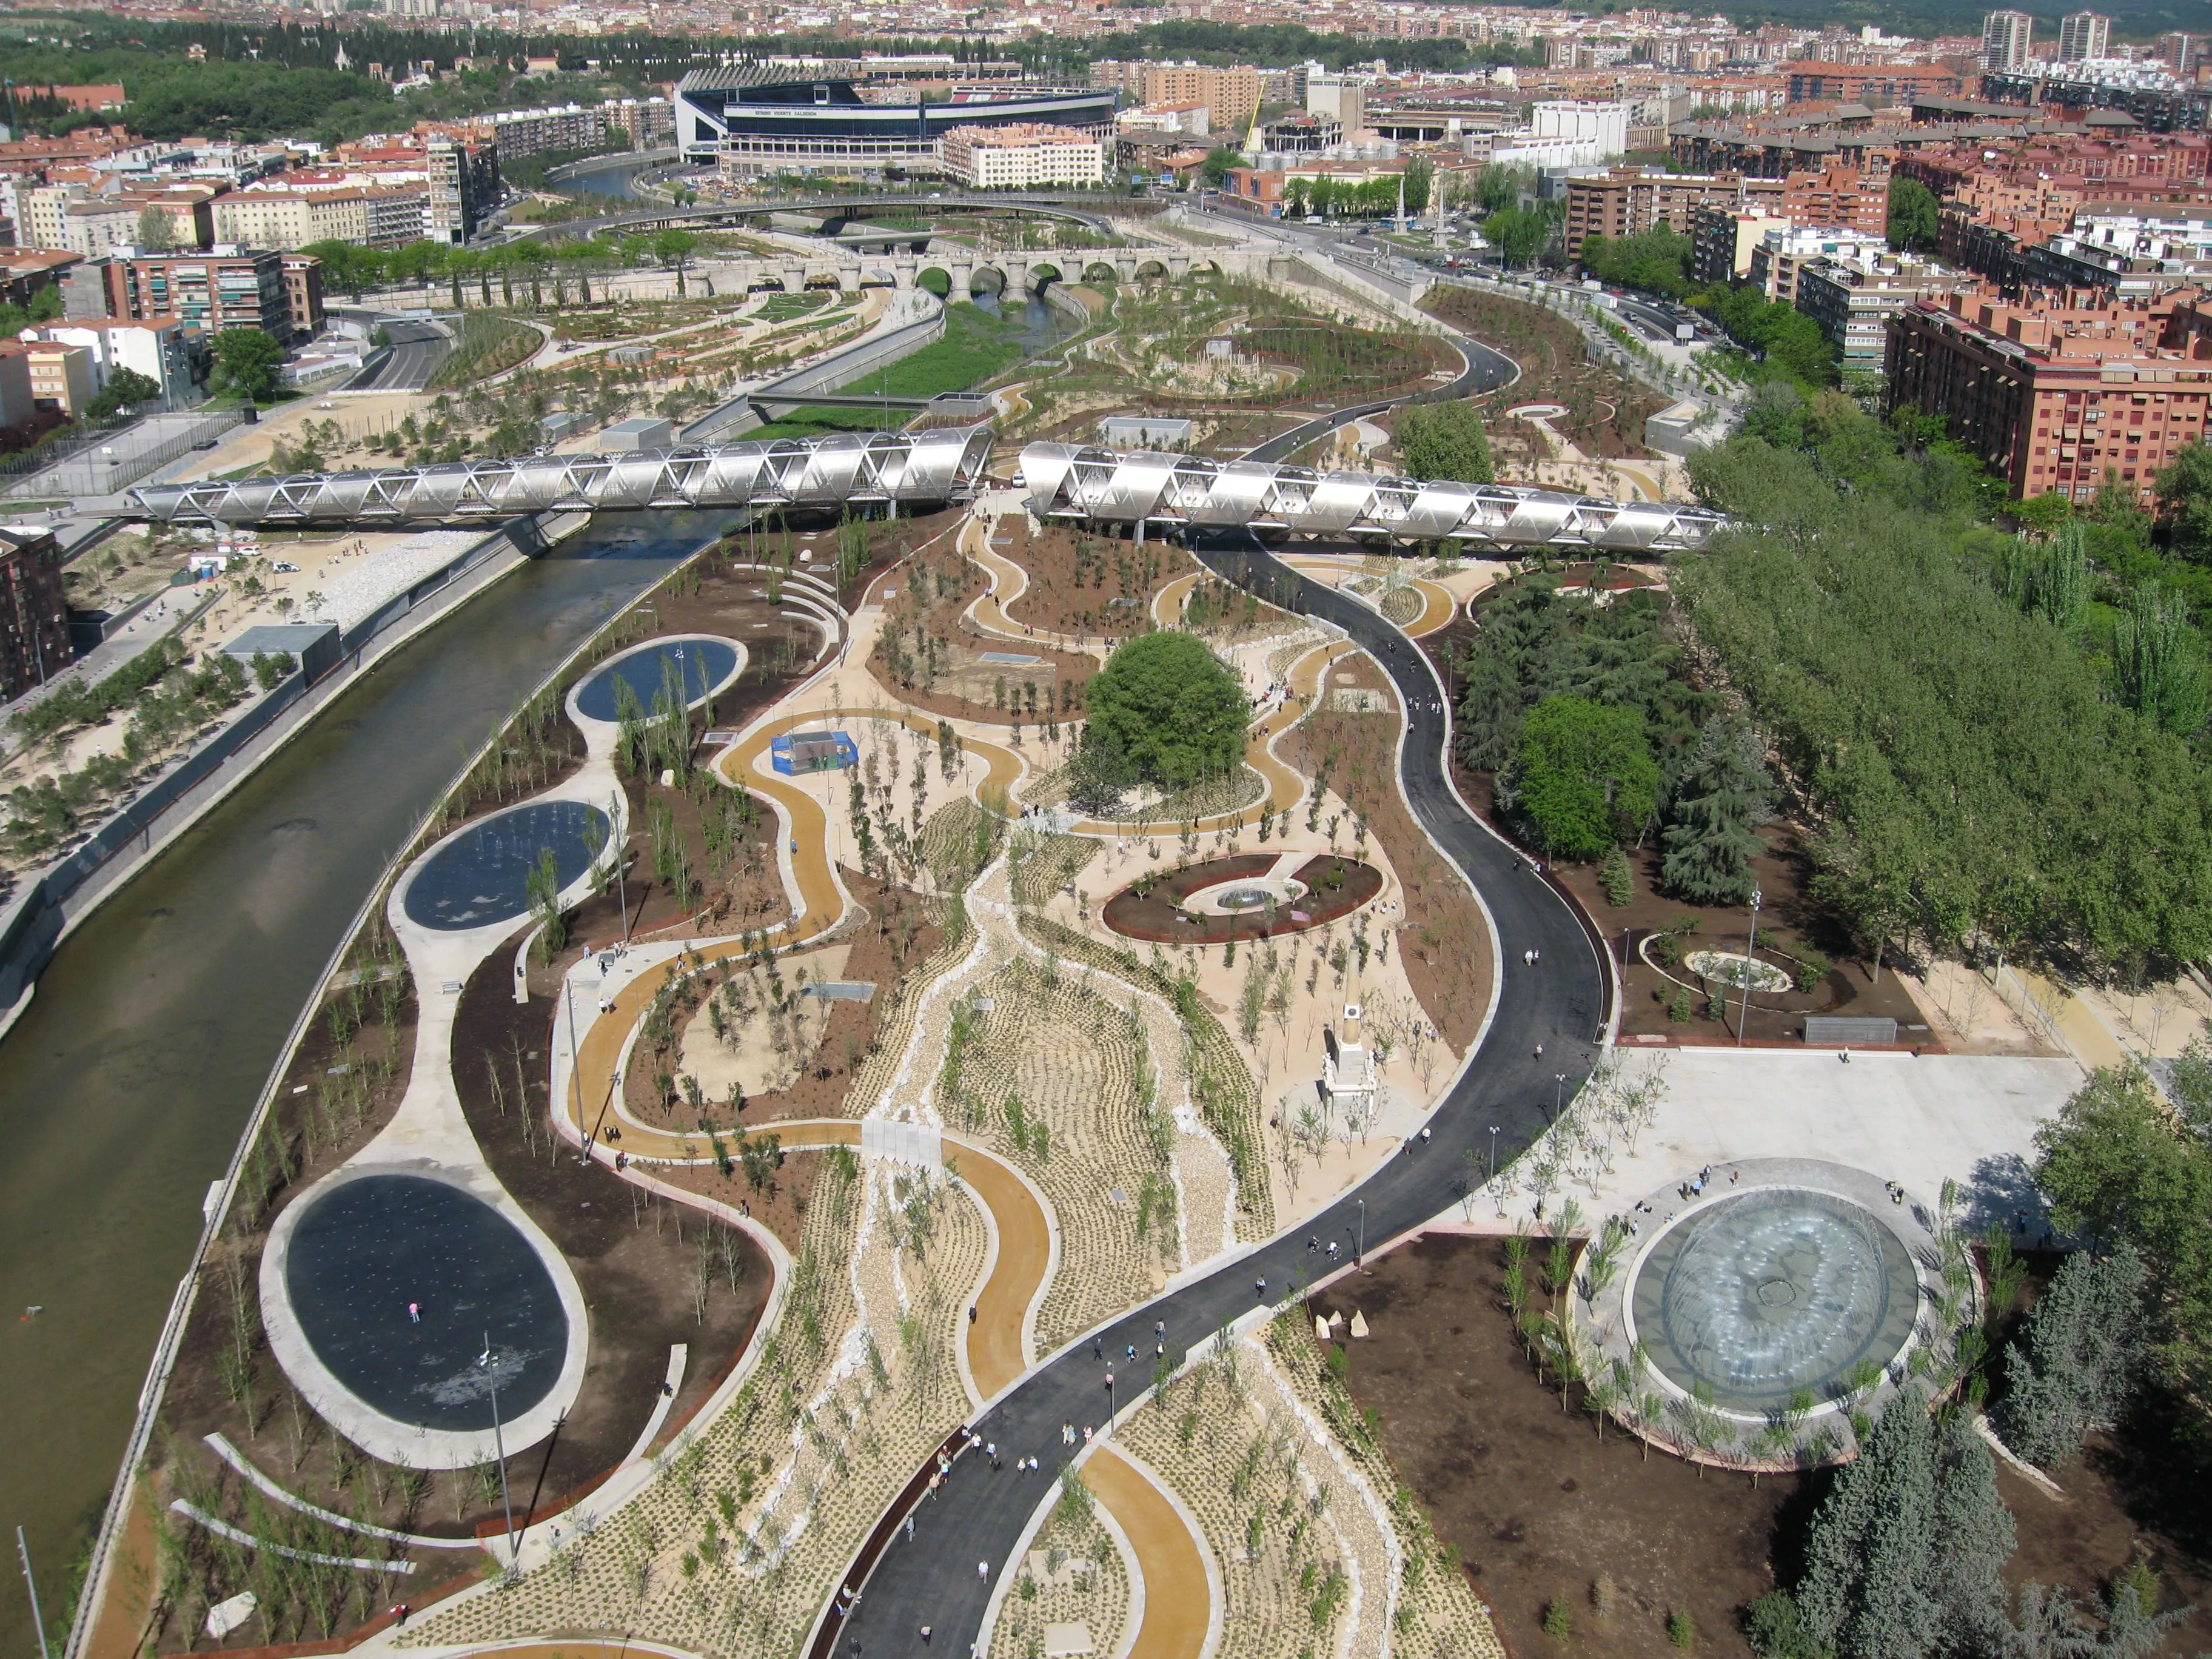 Madrid Rio Park in Spain, Europe | Parks - Rated 3.7